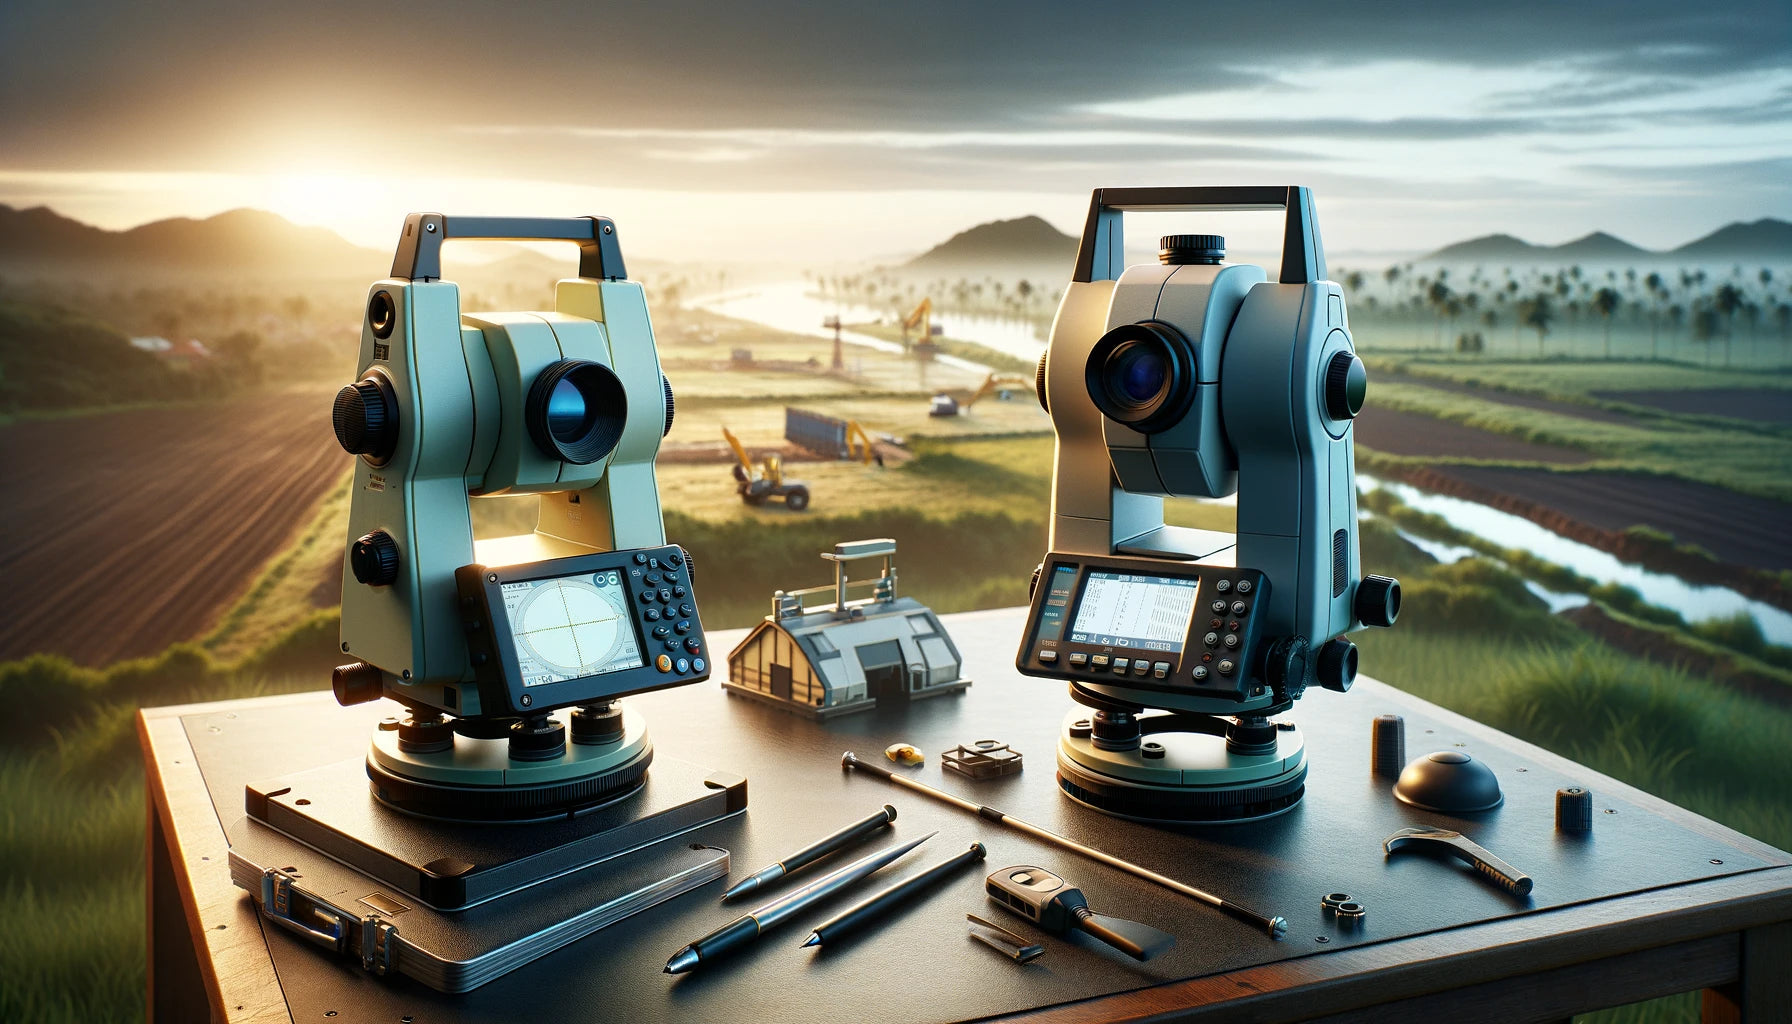 Theodolite or Total Station: Knowing When to Use Each